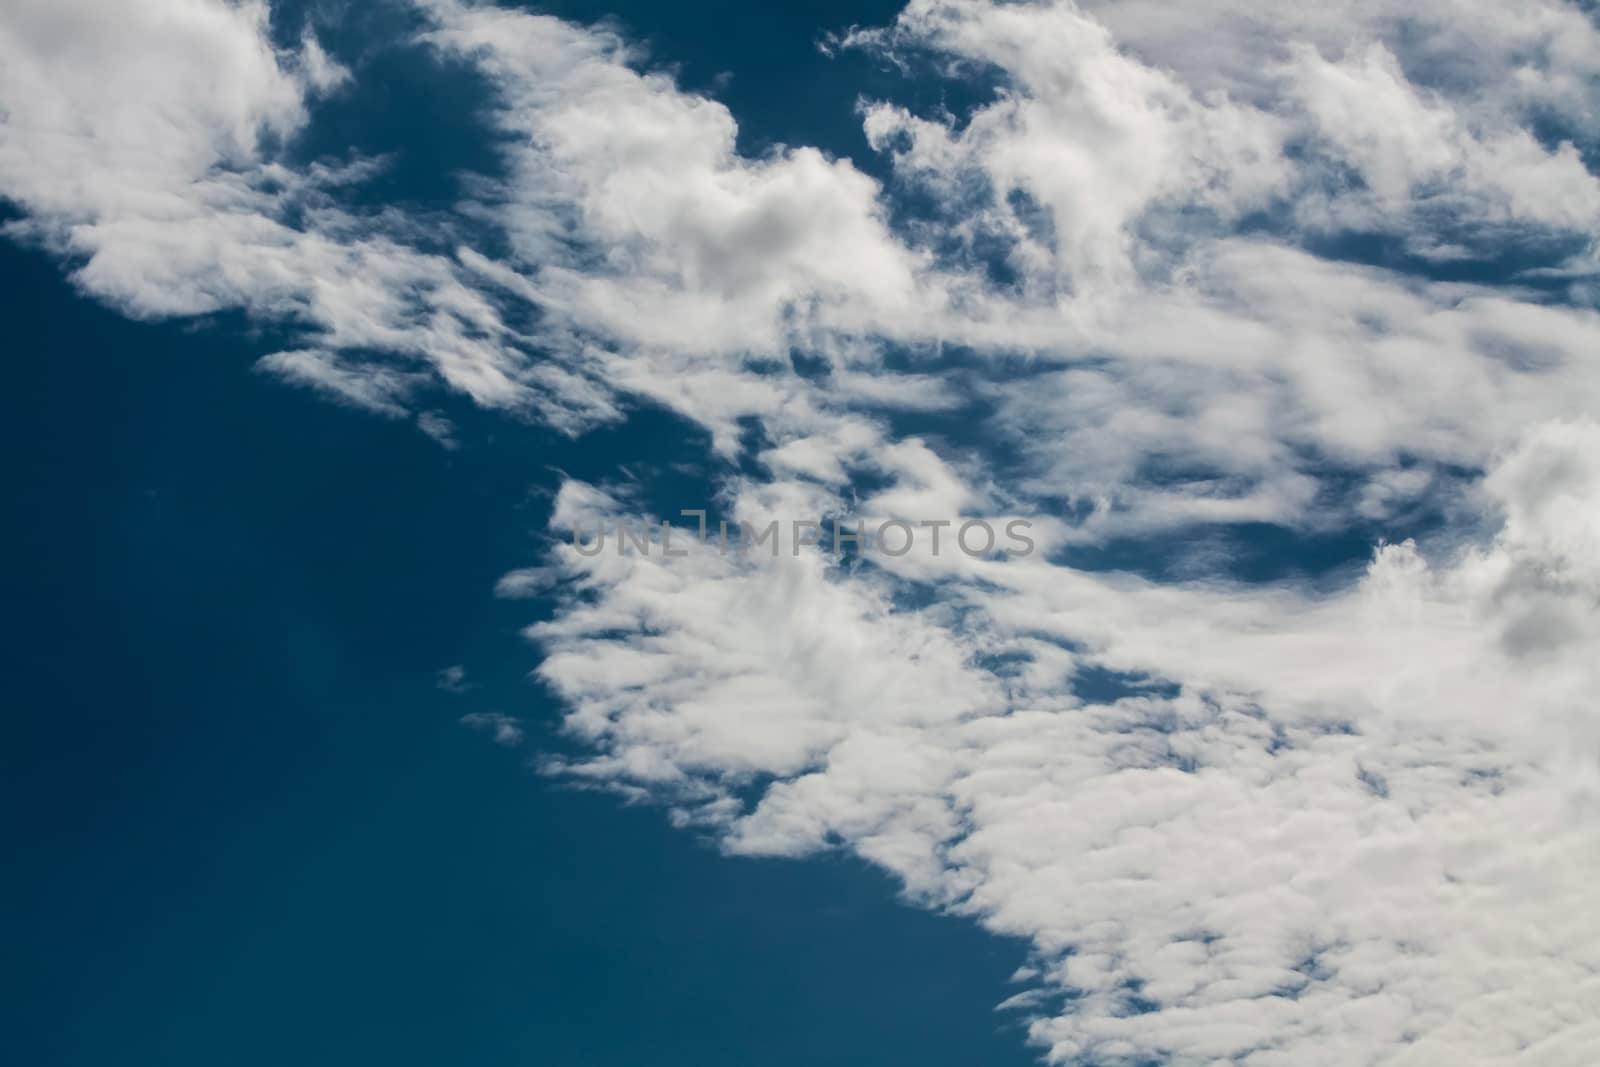 One of the images in a photo series depicting the grandeur of various cloud formations in the sky